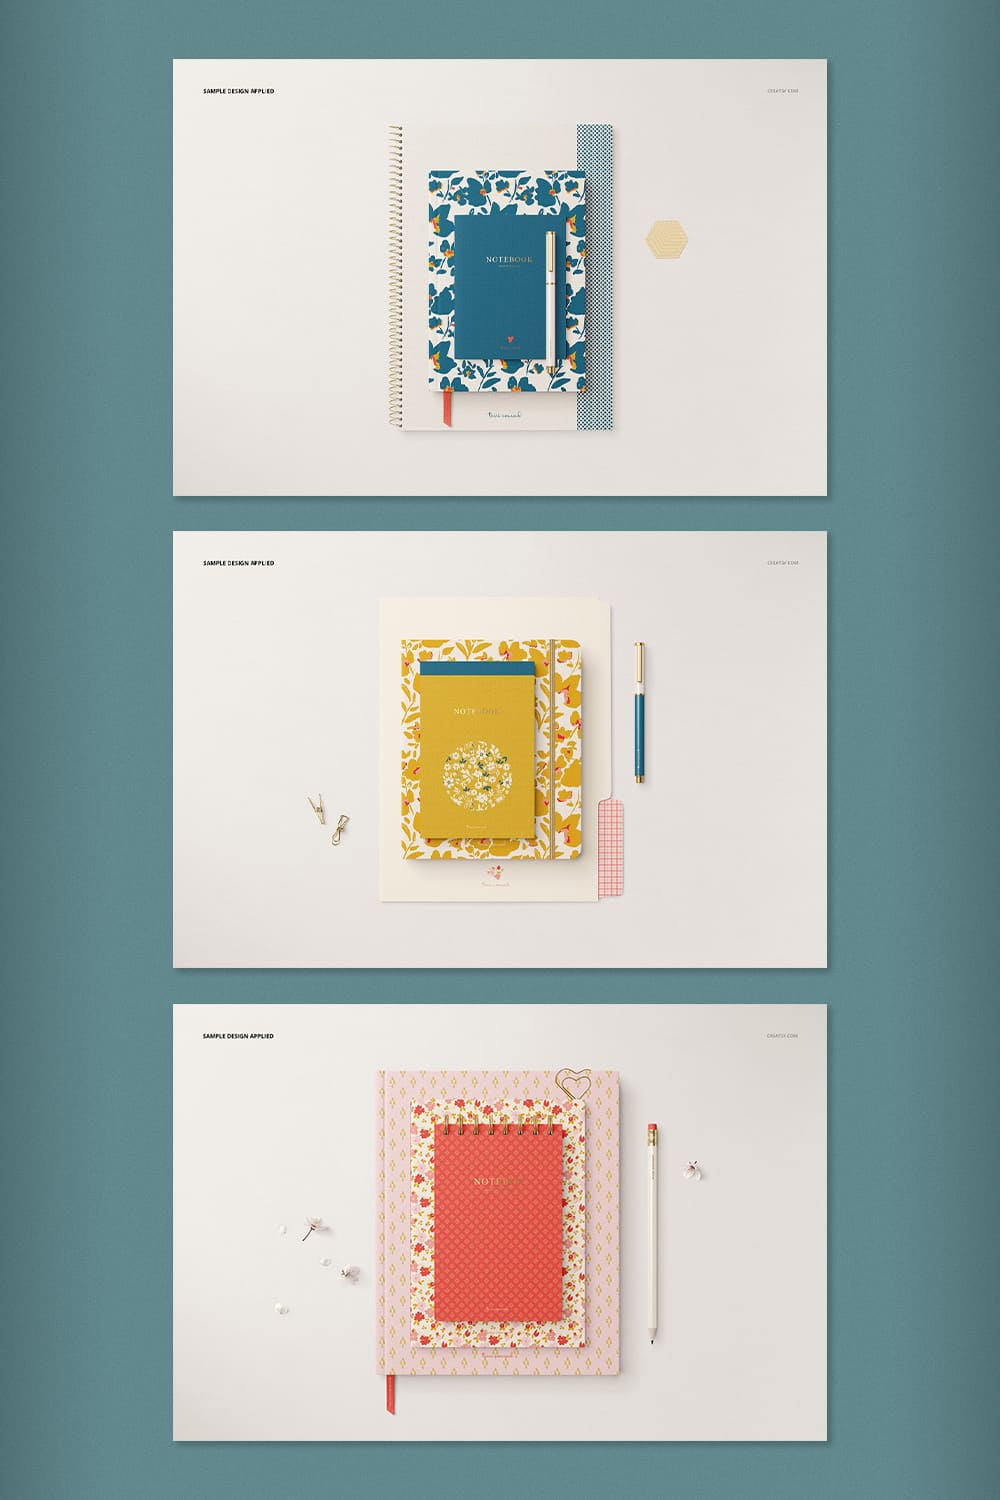 A pack of images of stationery with an enchanting design.